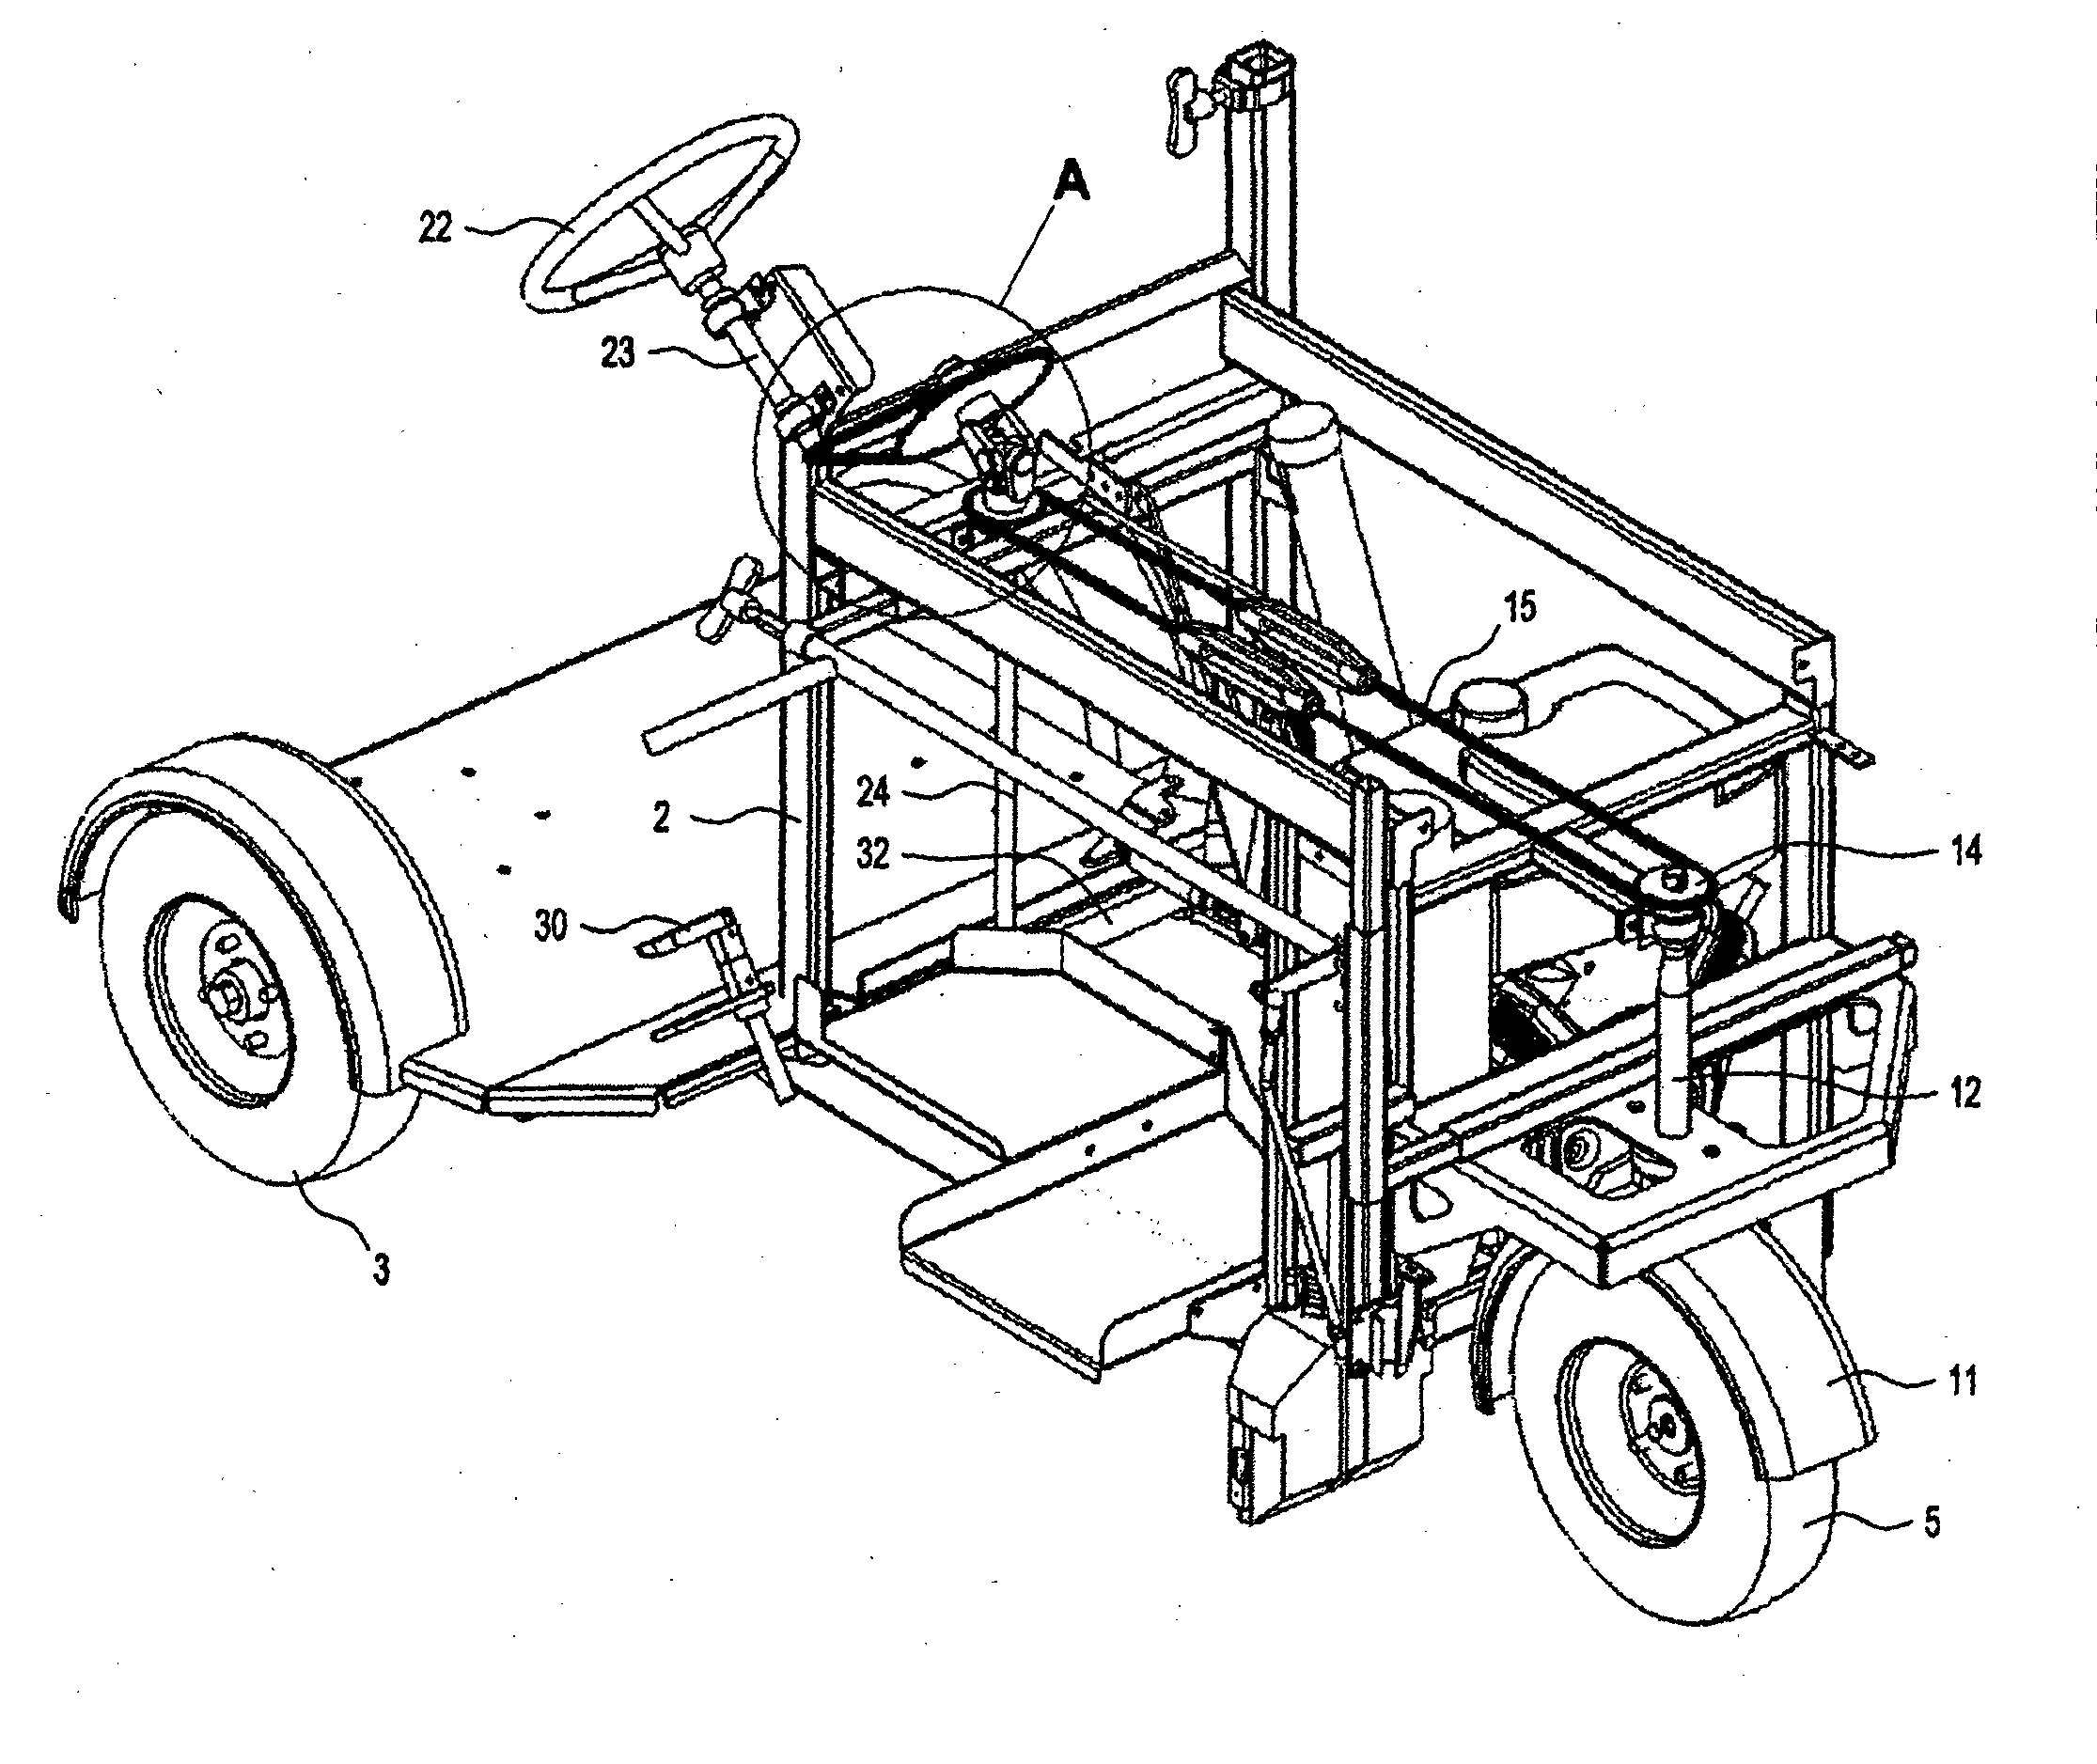 Vehicle for line marking